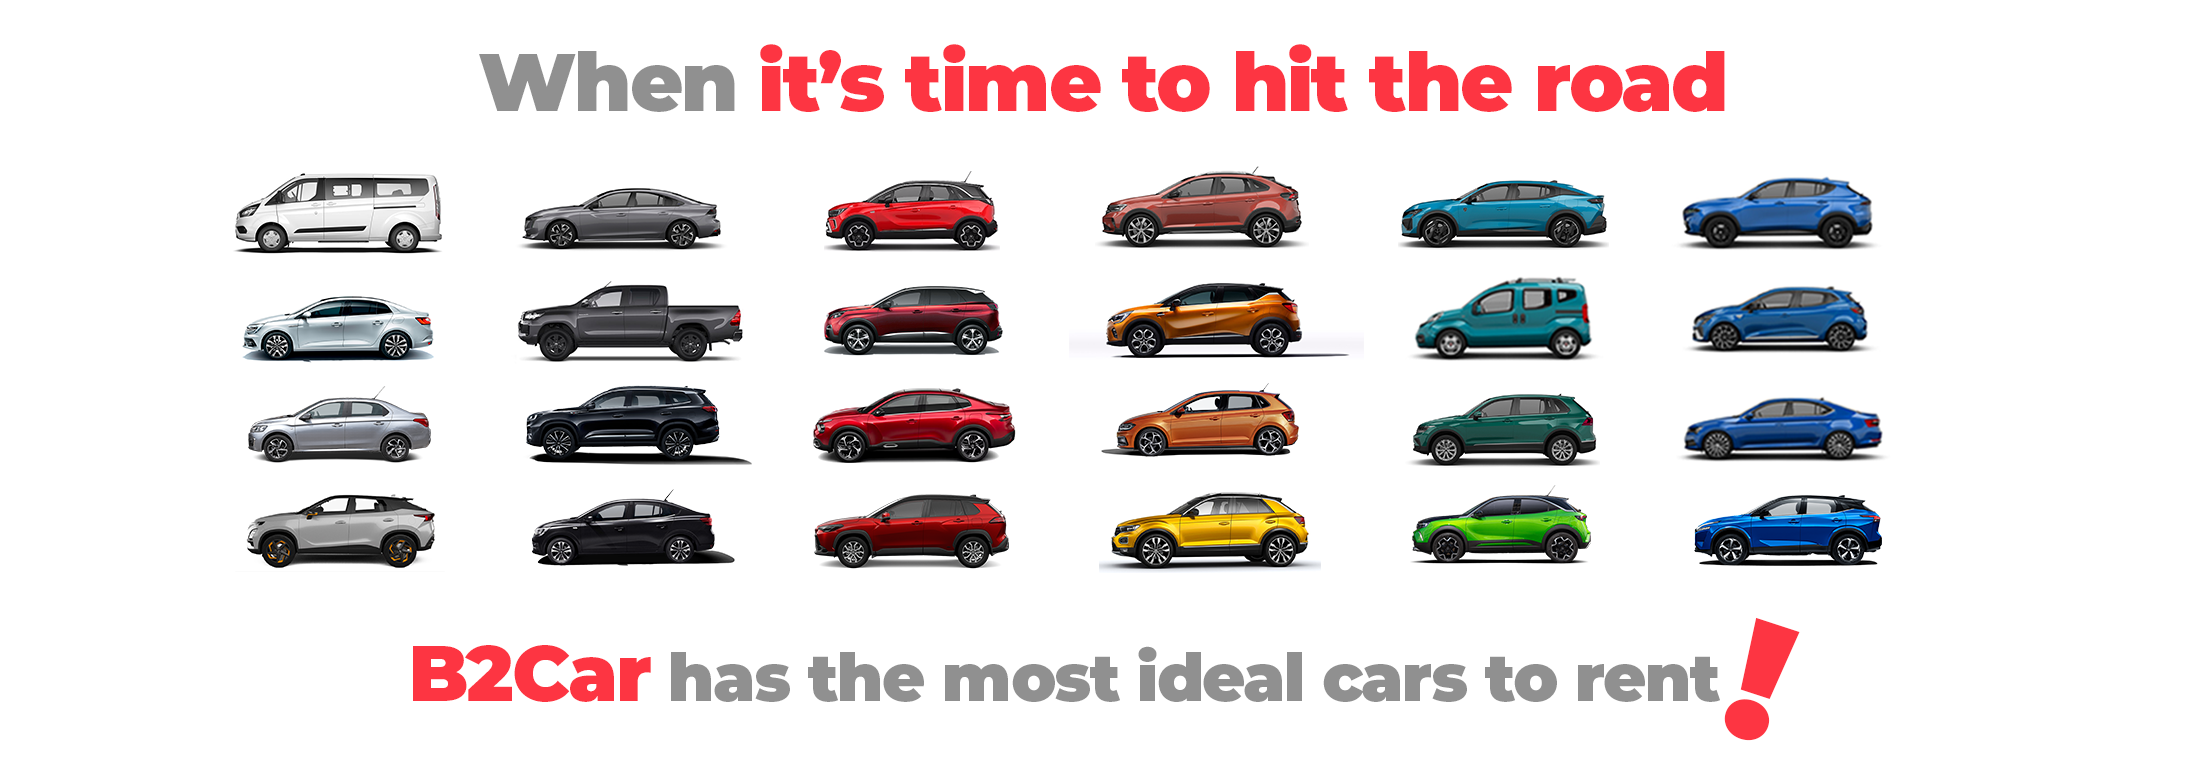 When it's time to hit the road, B2Car has the most ideal cars to rent! | Rent a Car